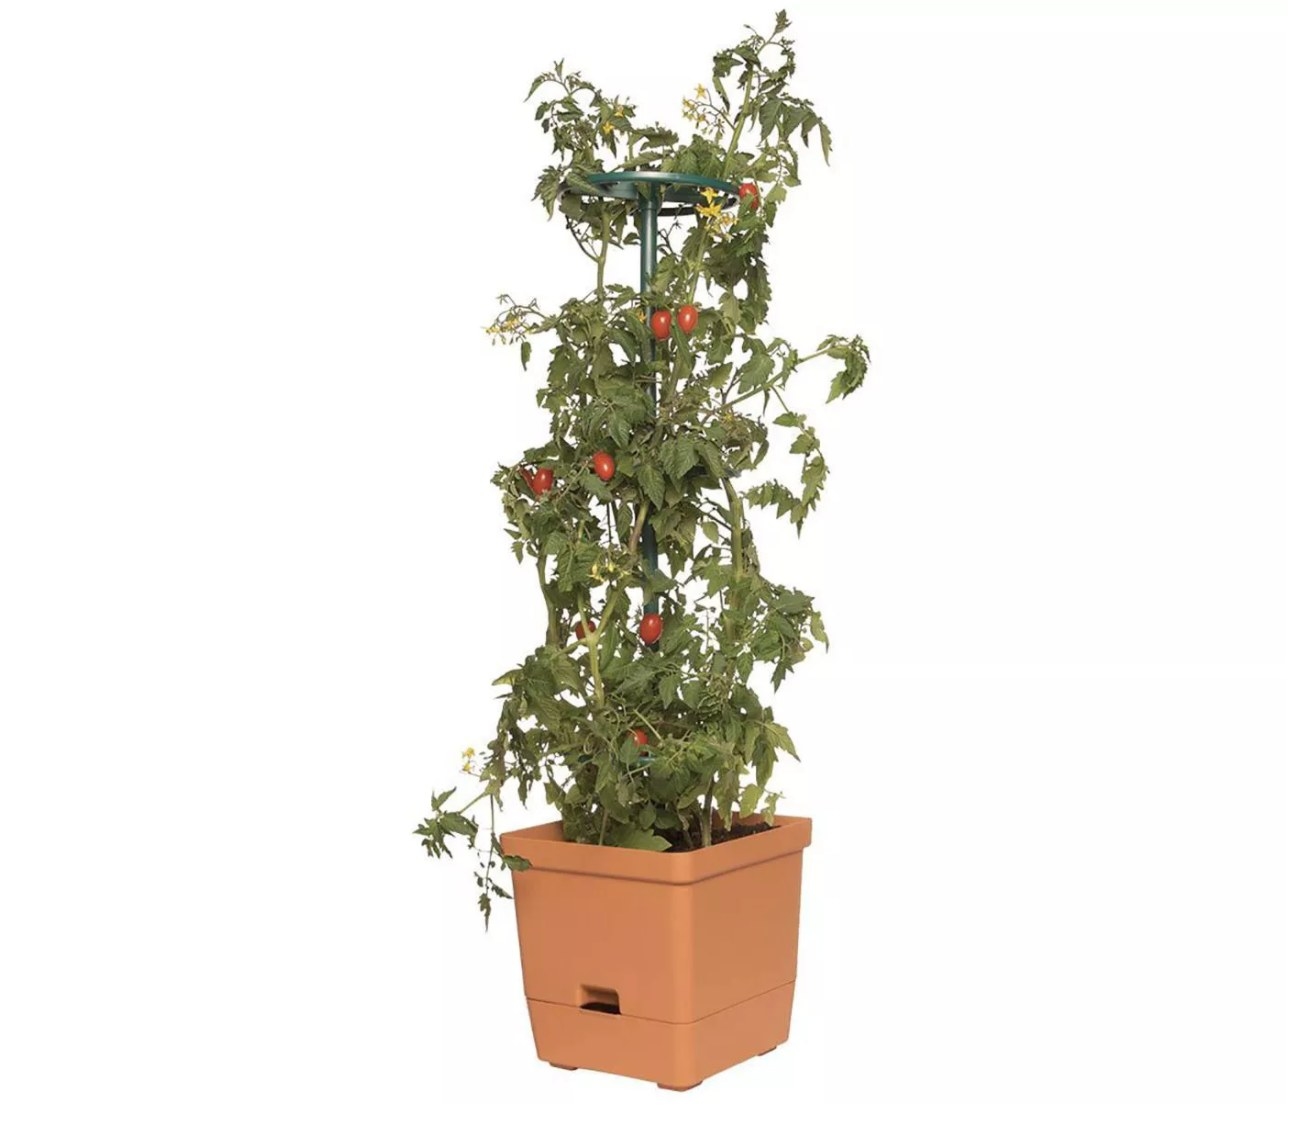 A brown pot and tomato plant in it